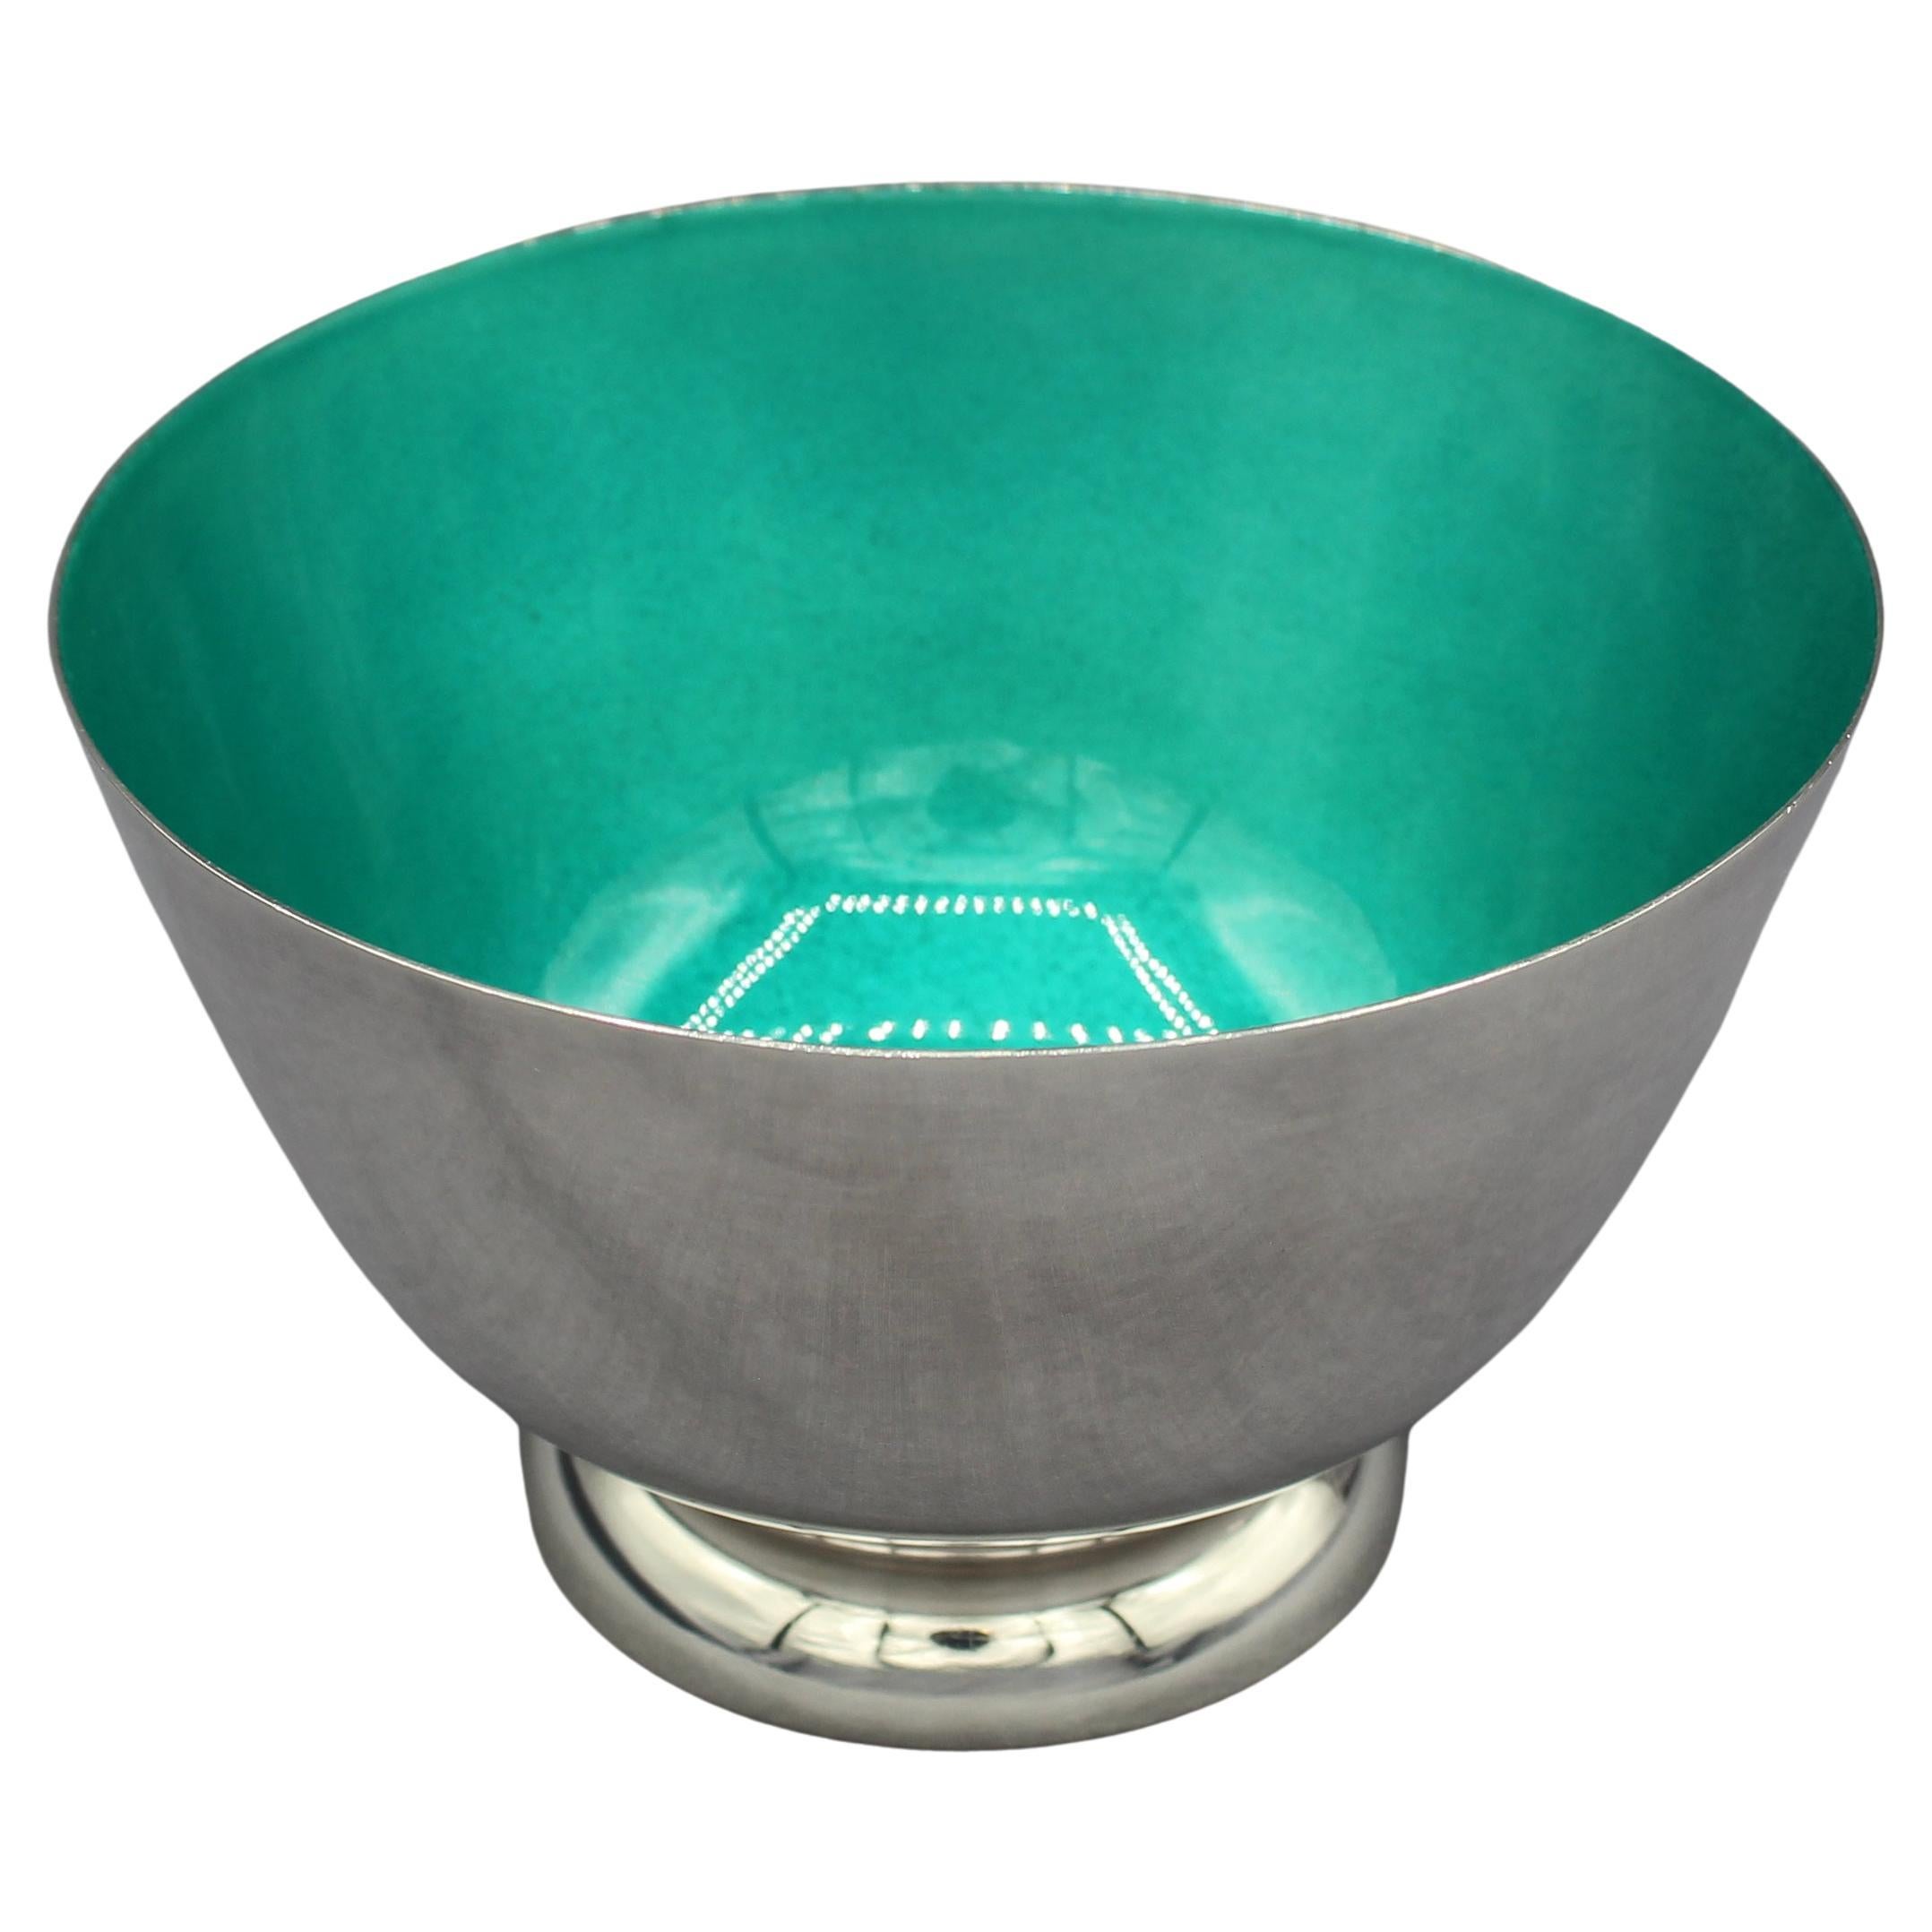 Turquoise Enameled Sterling Silver Bowl by Towle